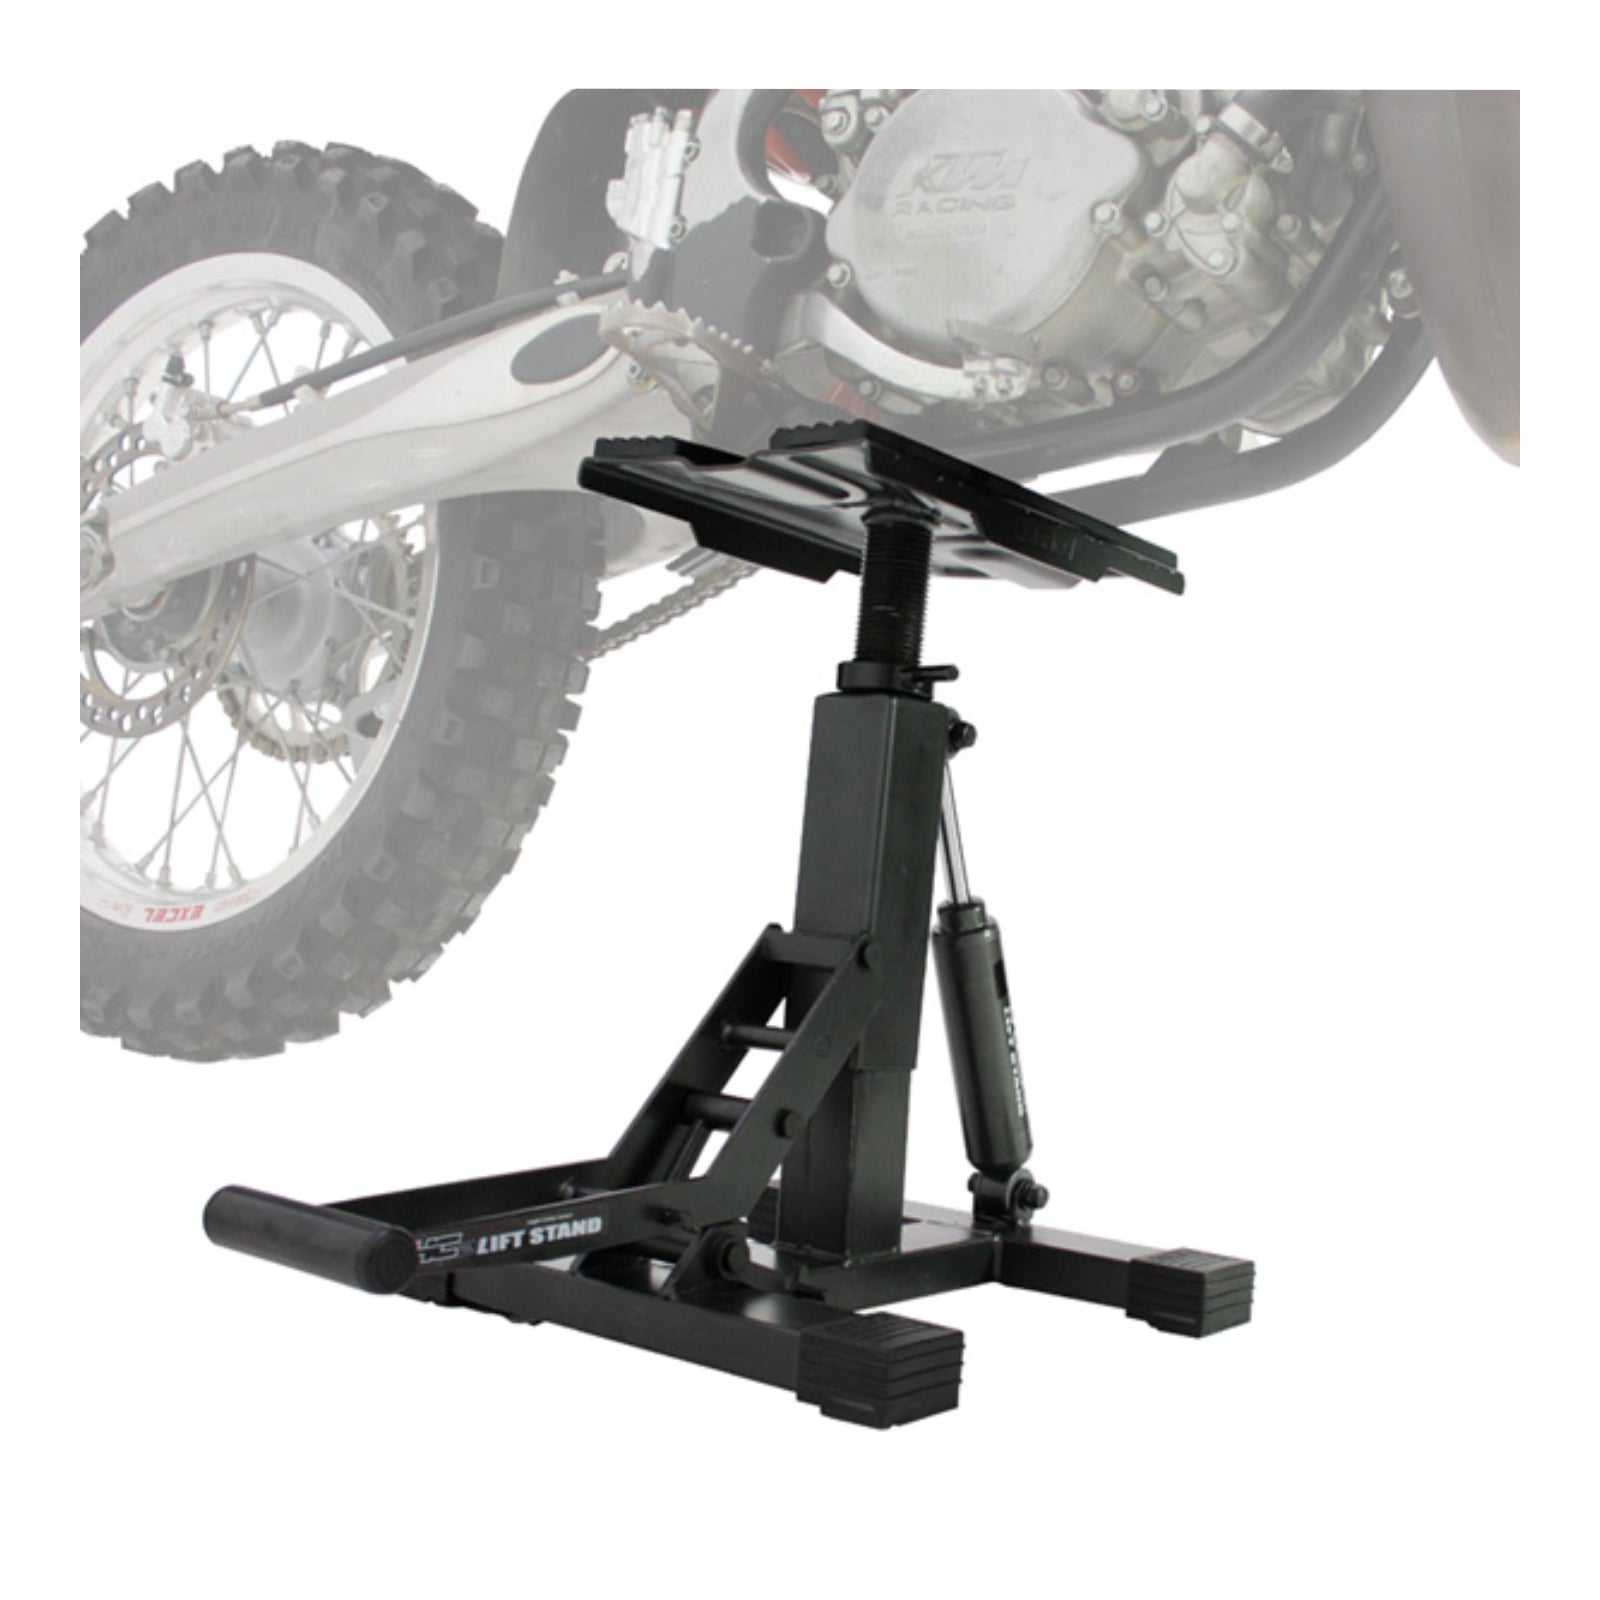 DRC, DRC HC2 Lift Stand Twin-arm with Damper - Black / Red